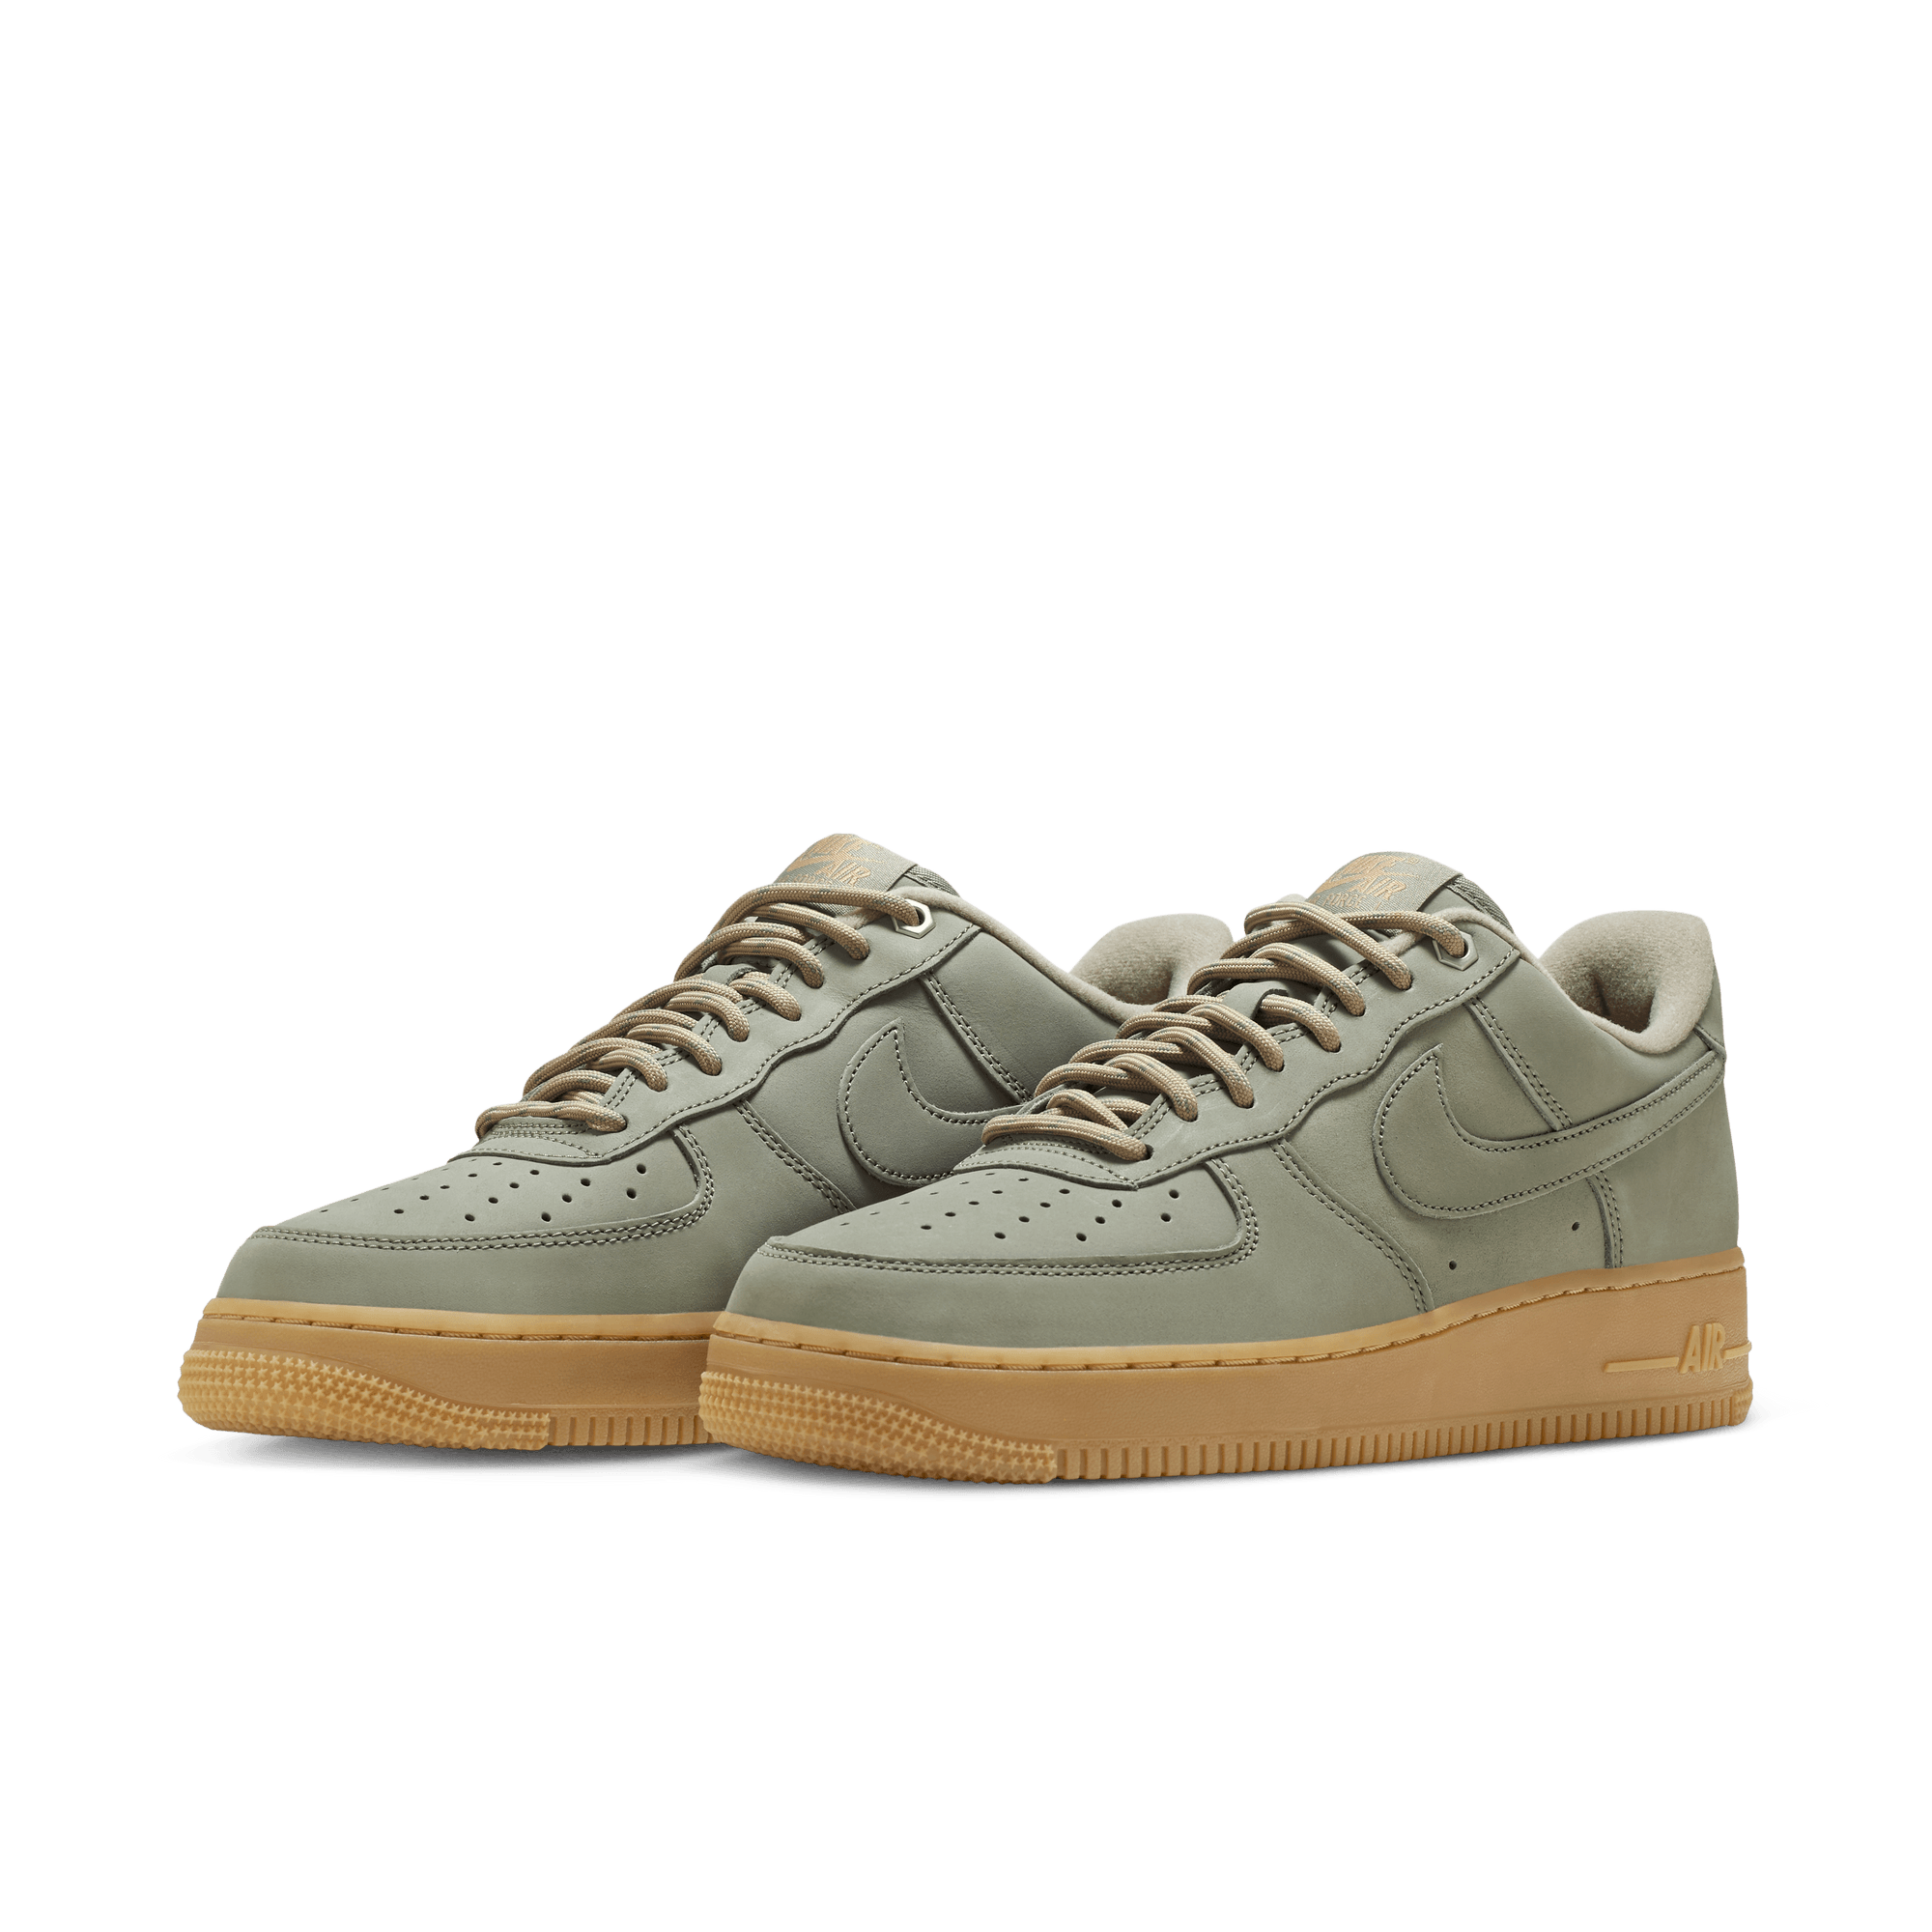 NIKE AIR FORCE 1 '07 WB MEN'S SHOES